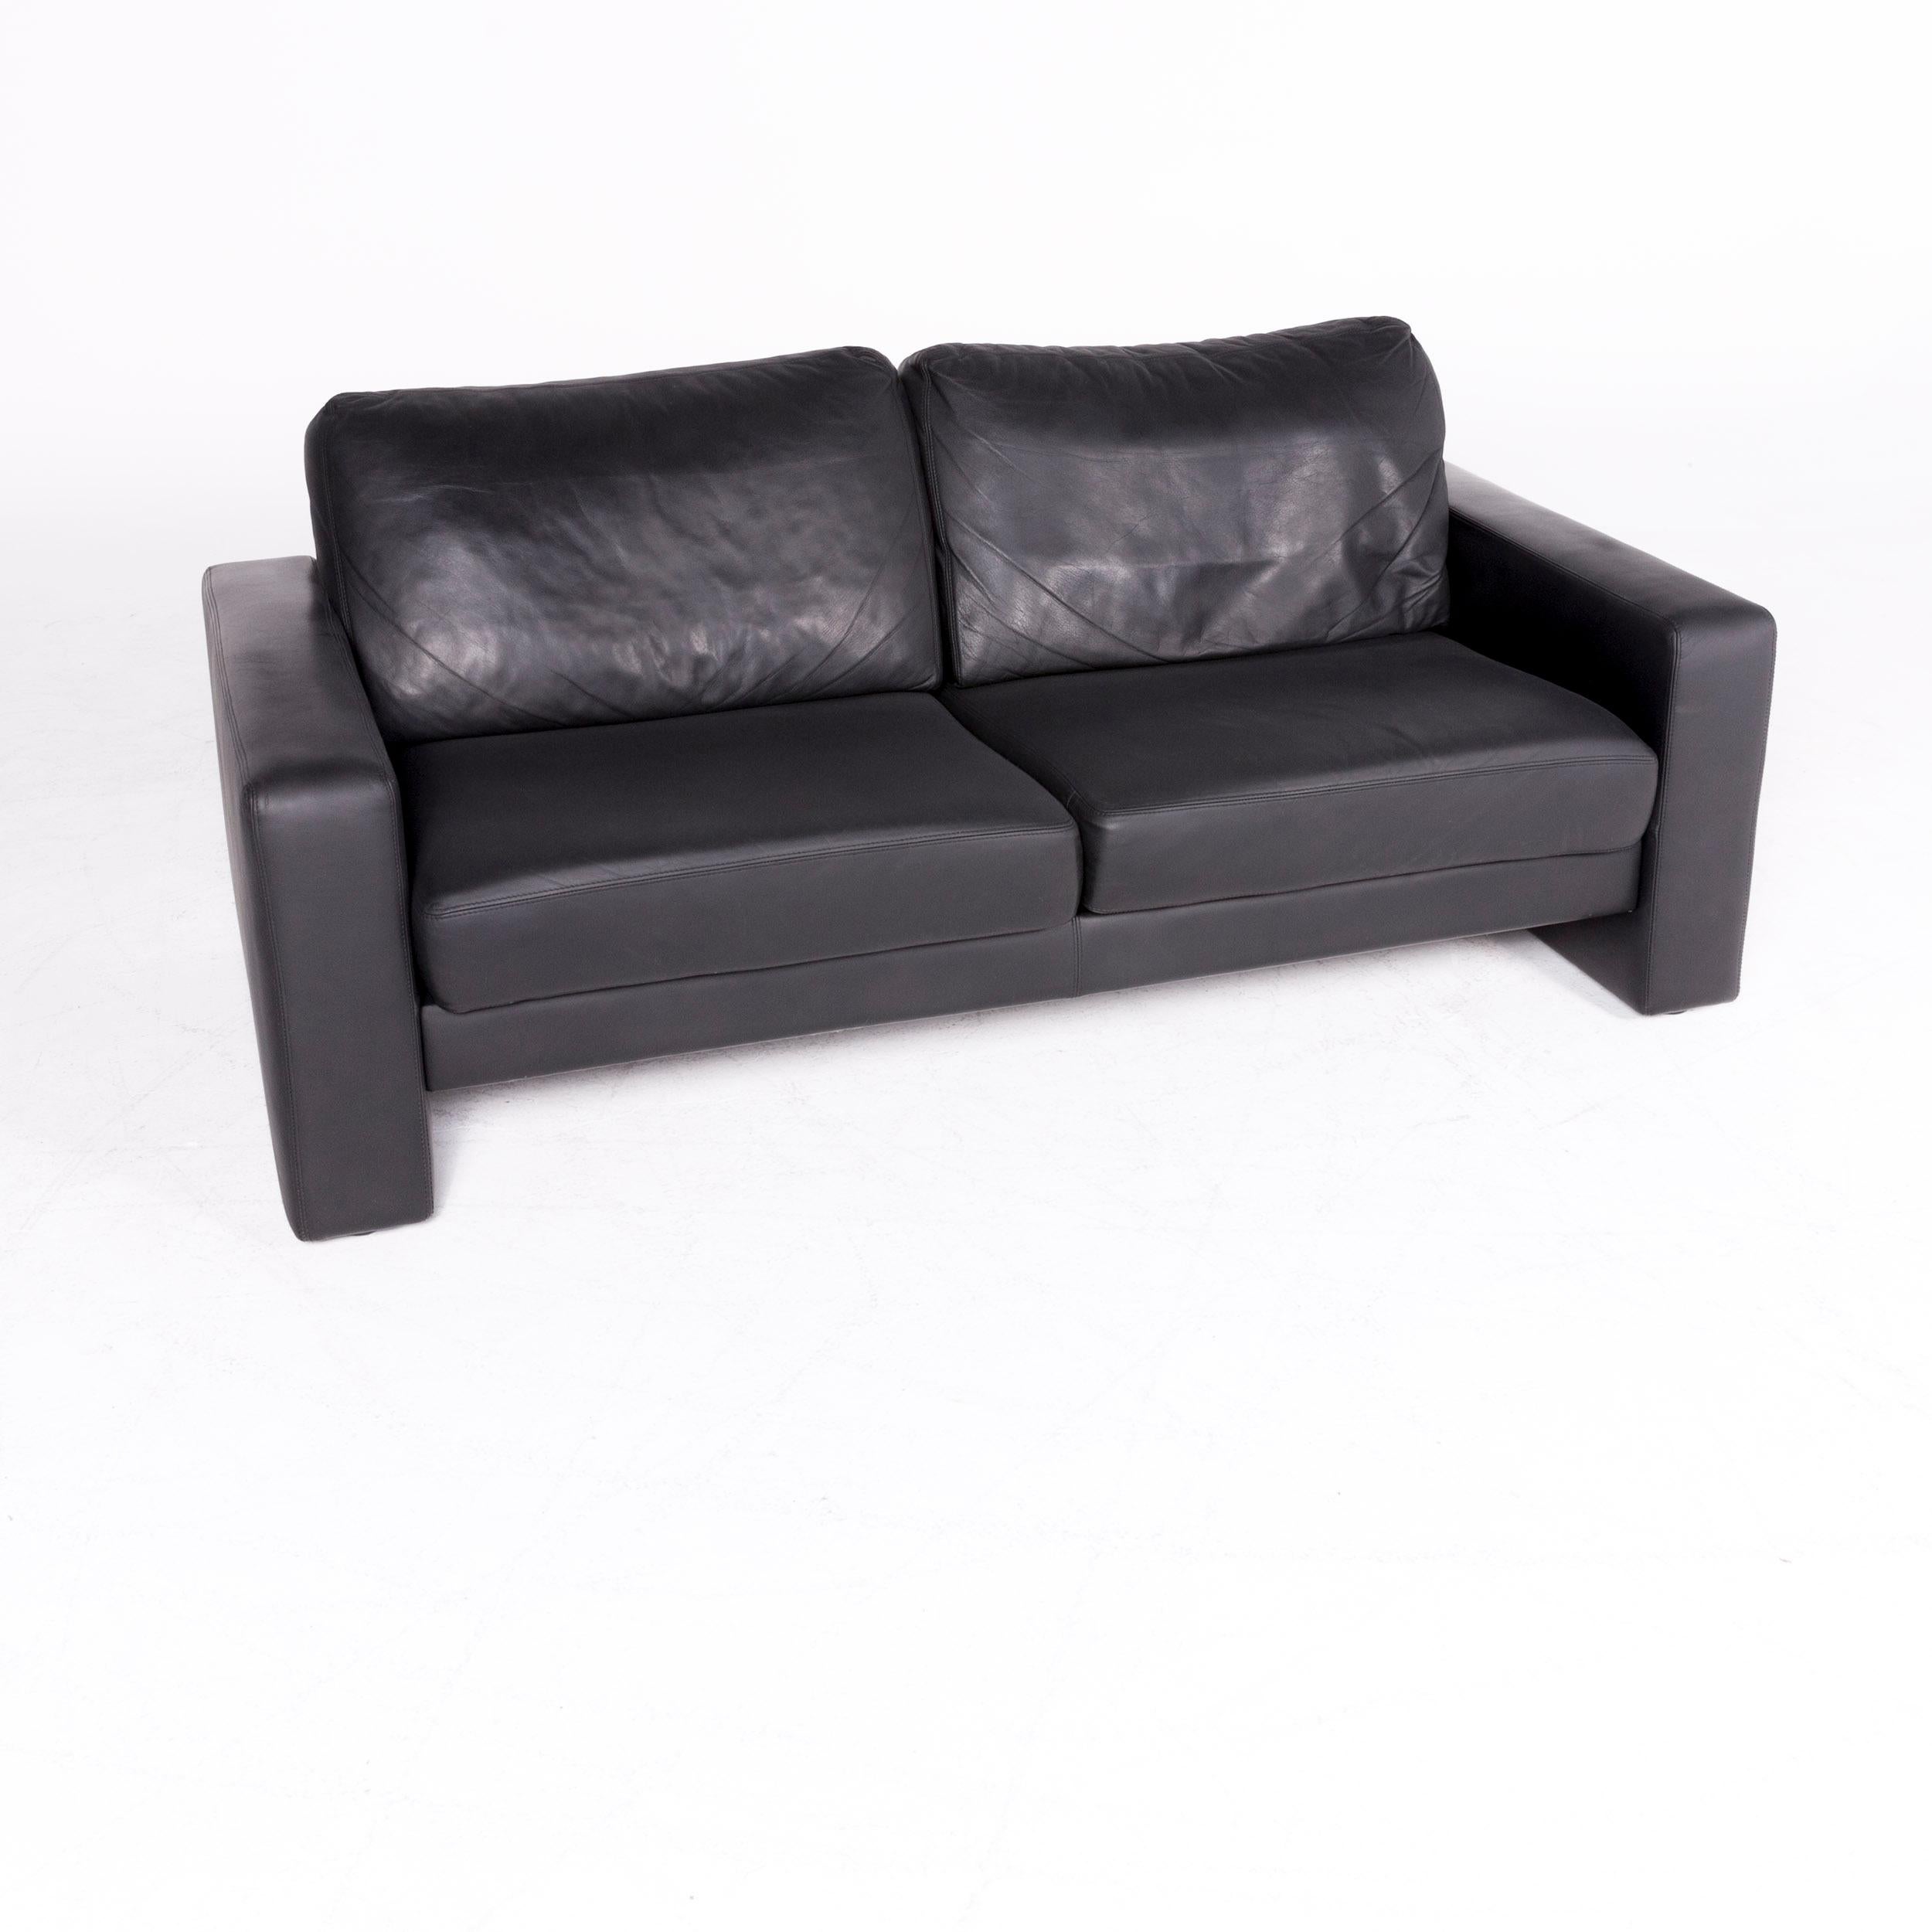 We bring to you a Schröno designer leather sofa black genuine leather two-seat couch.

Product measurements in centimeters:

Depth 89
Width 182
Height 77
Seat-height 43
Rest-height 55
Seat-depth 50
Seat-width 146
Back-height 35.
 